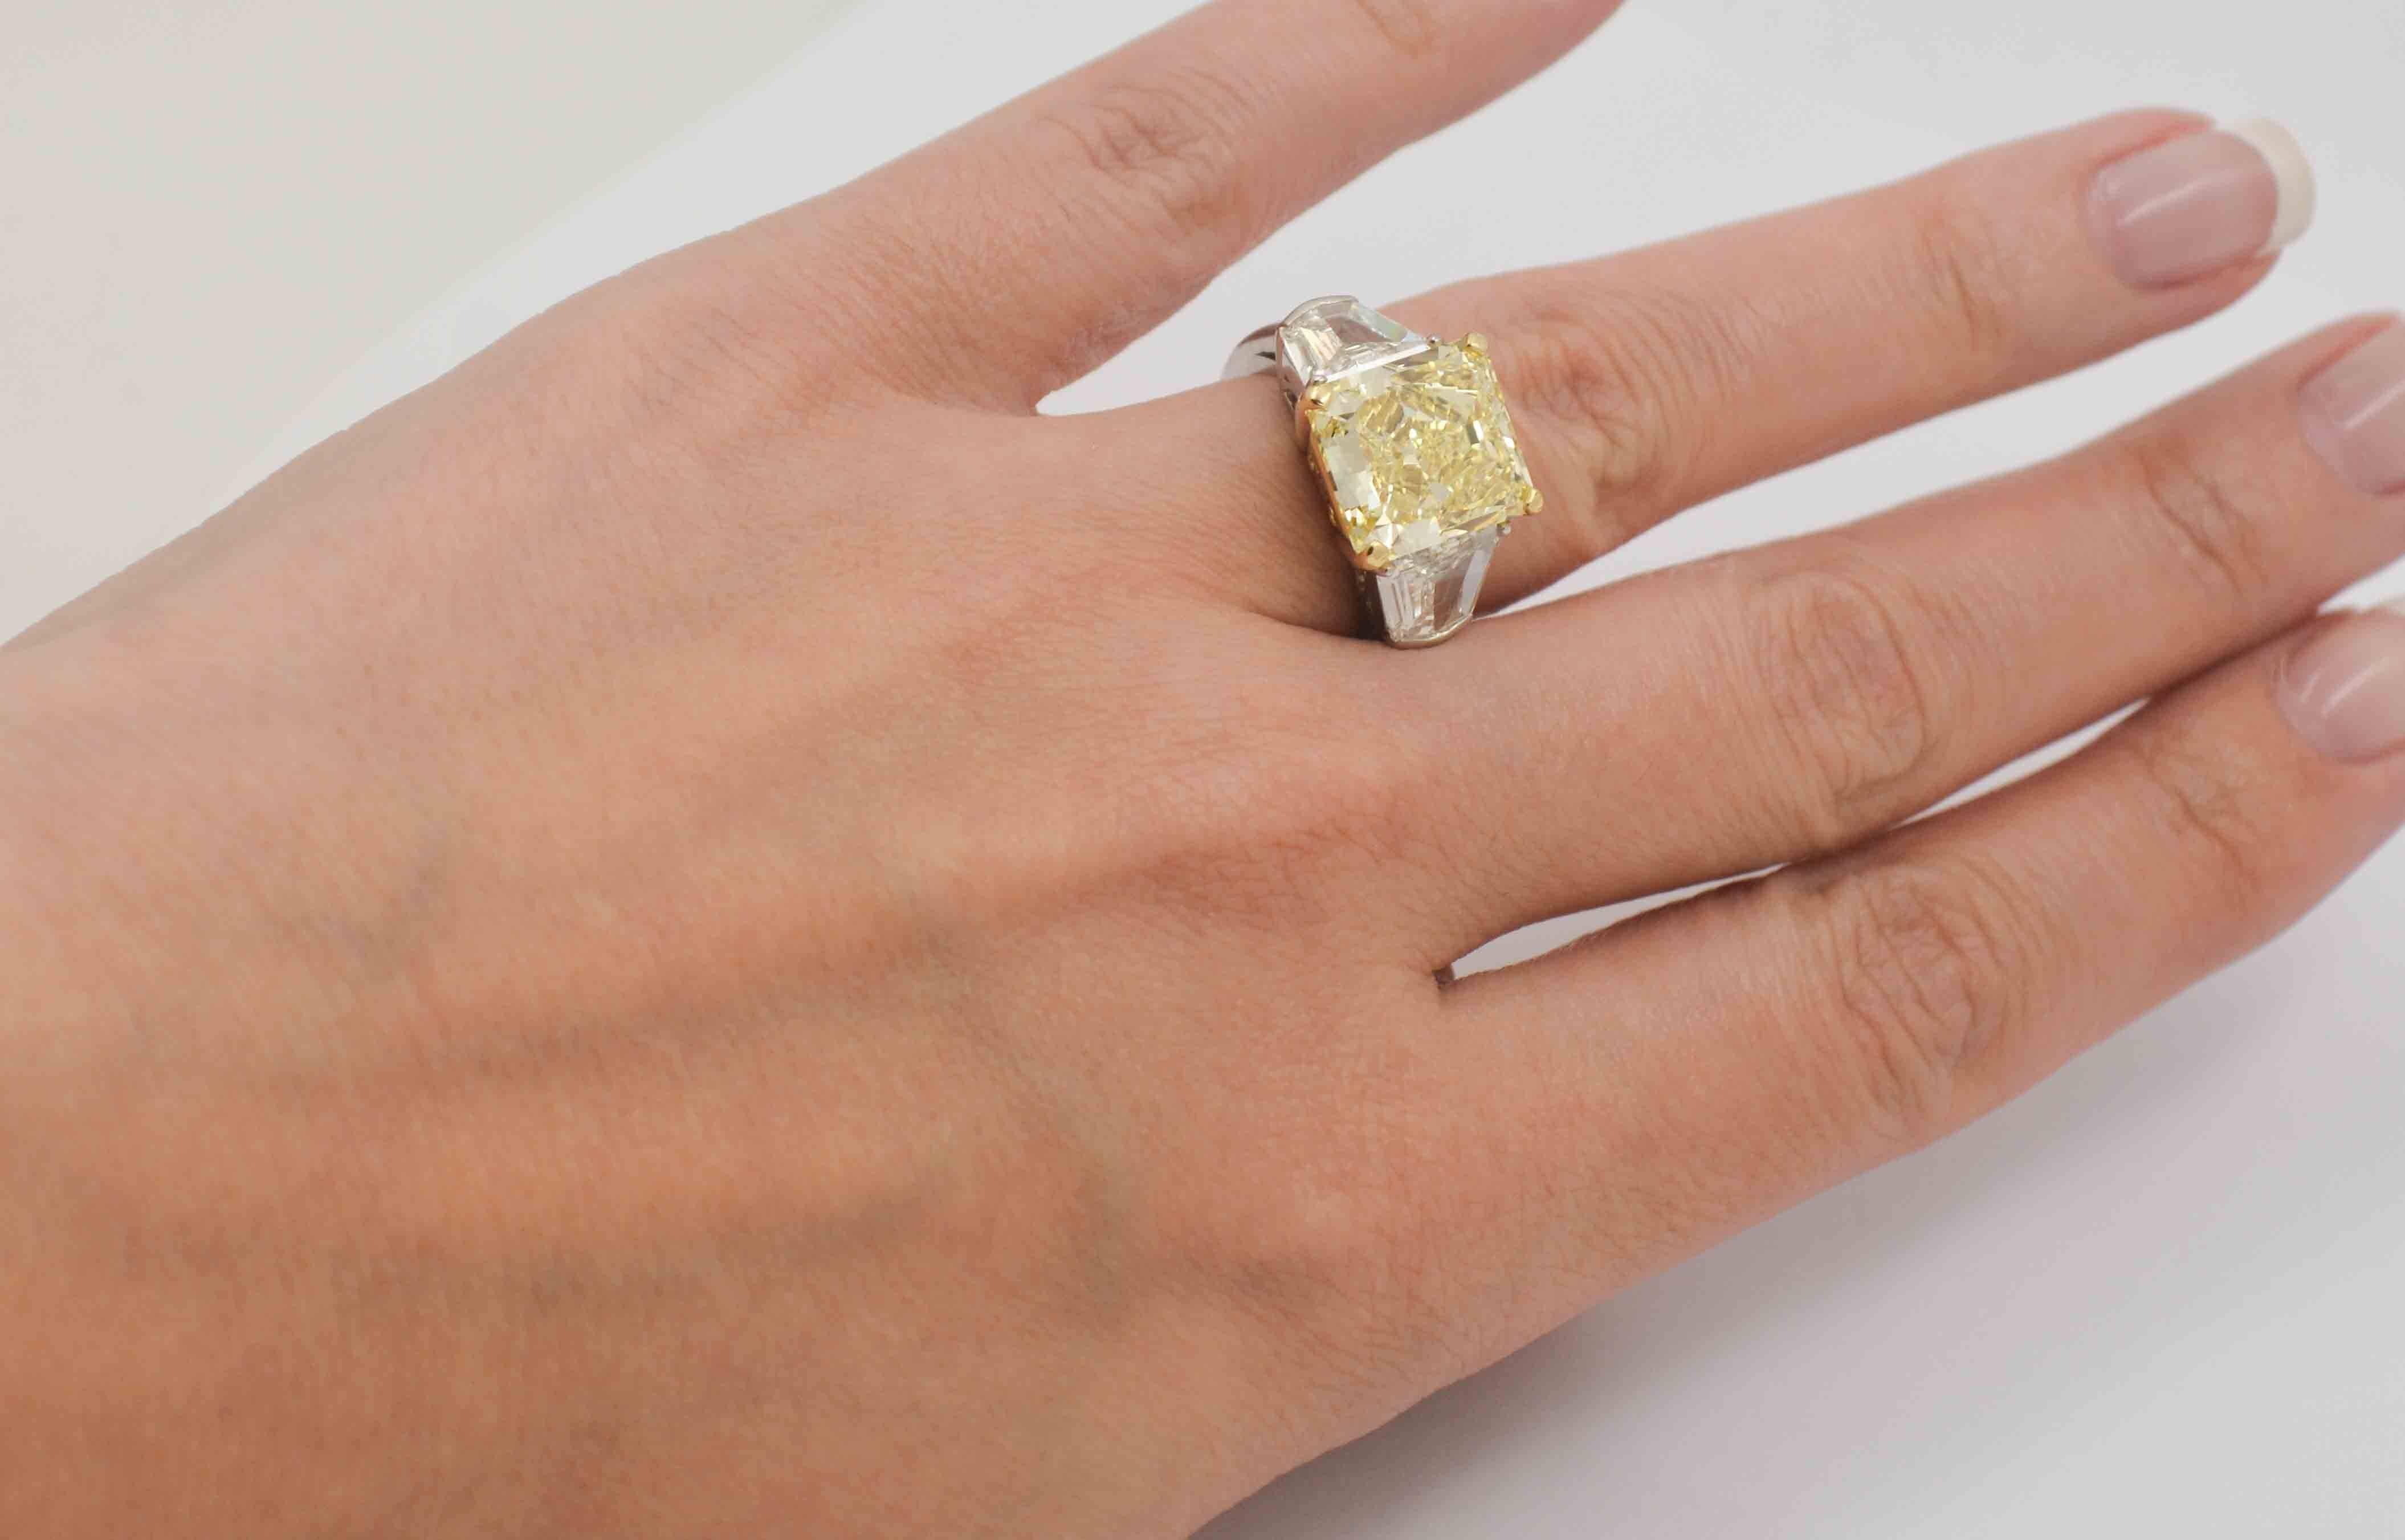 Why not turn heads as you wear this astonishing platinum engagement ring? The center stone is a sensational 8.01 carat natural fancy yellow diamond with an astonishing VVS2 clarity (ring comes with a GIA report).  Contrasting this glamorous center